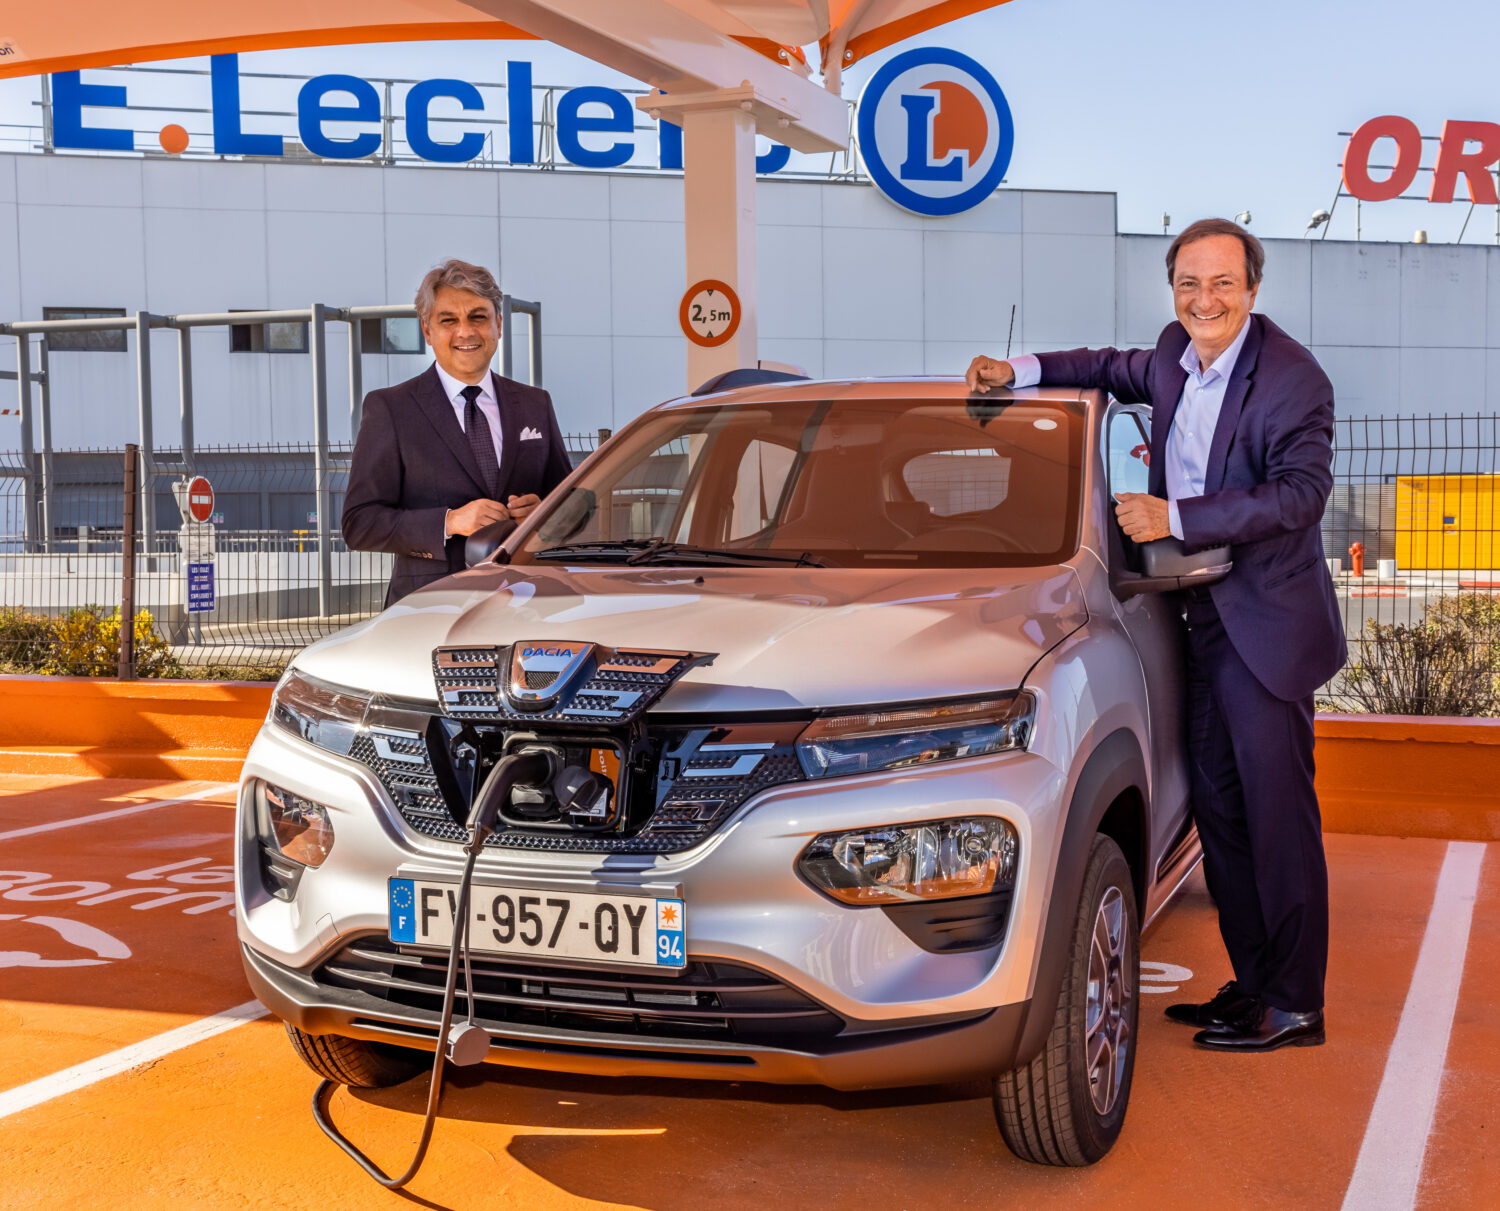 2021 - E.Leclerc Location welcomes the first Dacia Spring, 100% electric